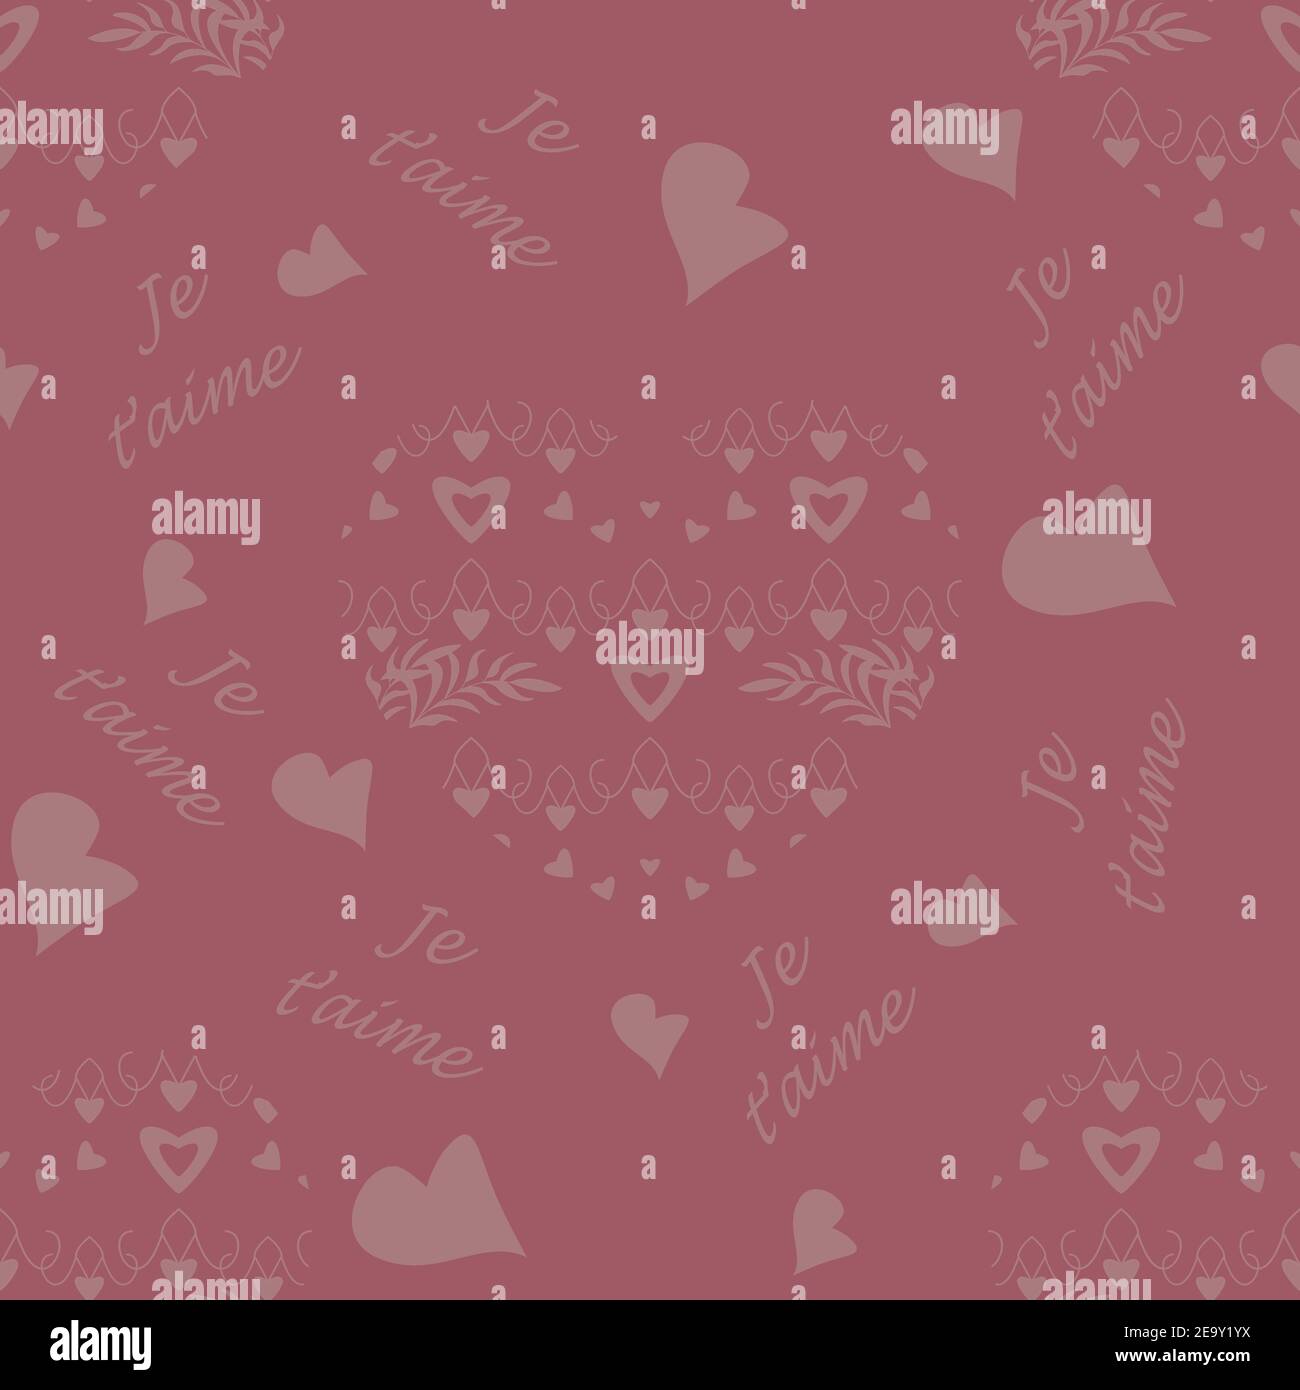 Seamless pattern for Valentine's Day, declaration of love with little hearts and text in french language, I love you. Raspberry color. Vector. Stock Vector